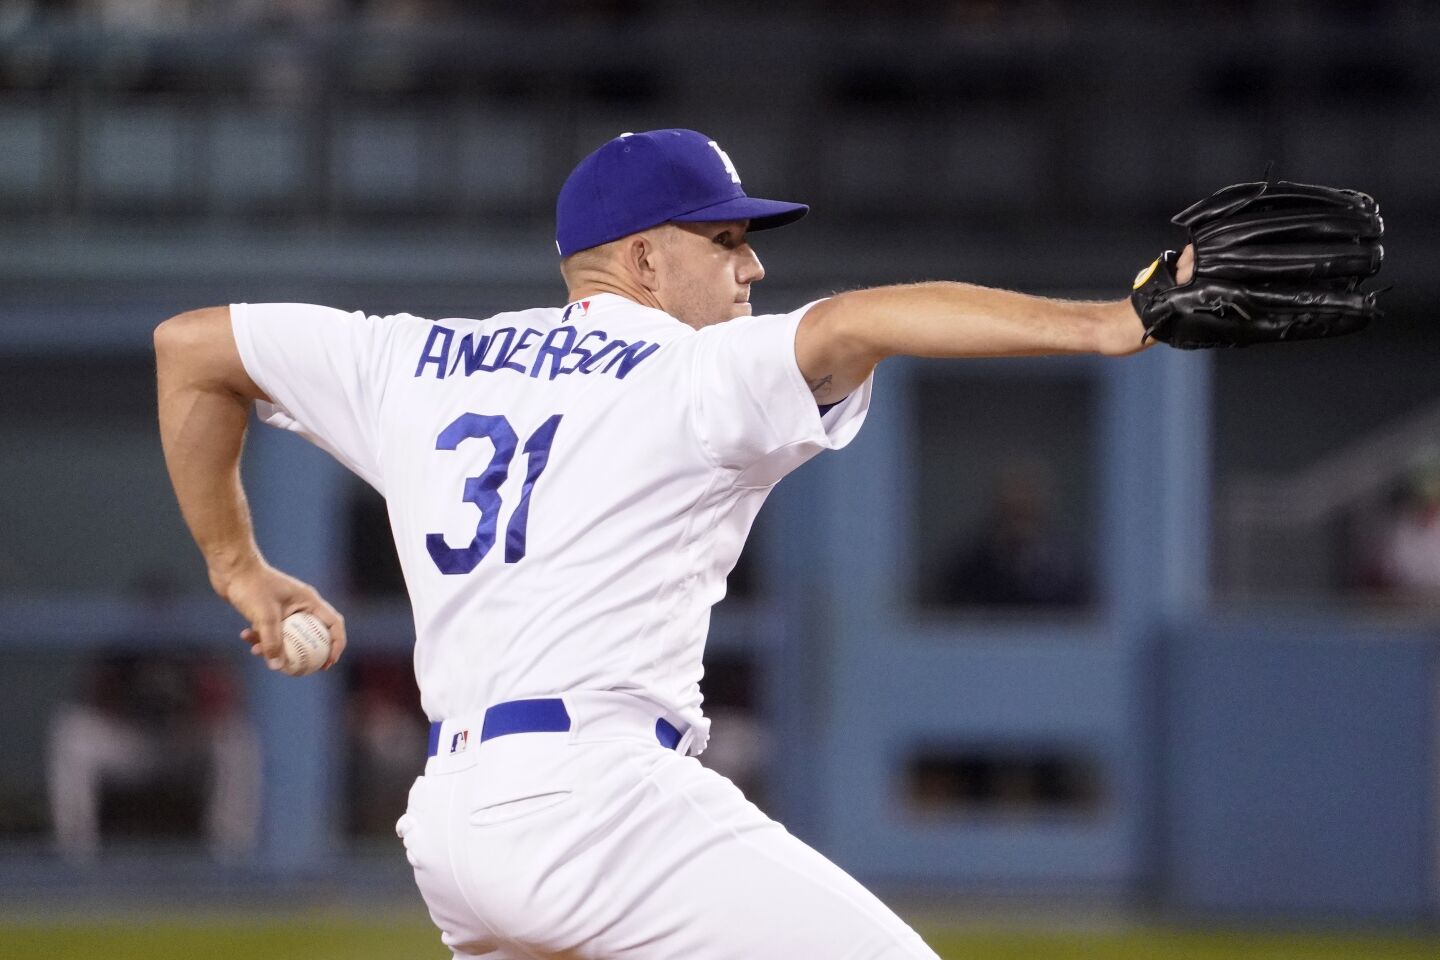 Game 1: Dodgers LHP Tyler Anderson (15-4, 2.52 ERA)His win total is more than double any previous season in the majors, while his ERA, WHIP (1.01), hit rate (7.3 per nine innings) and home run rate (0.7 per nine) are career-bests. Anderson is 2-0 with a 1.50 ERA, 13 strikeouts and a 1.00 WHIP in three starts this year against the Padres.